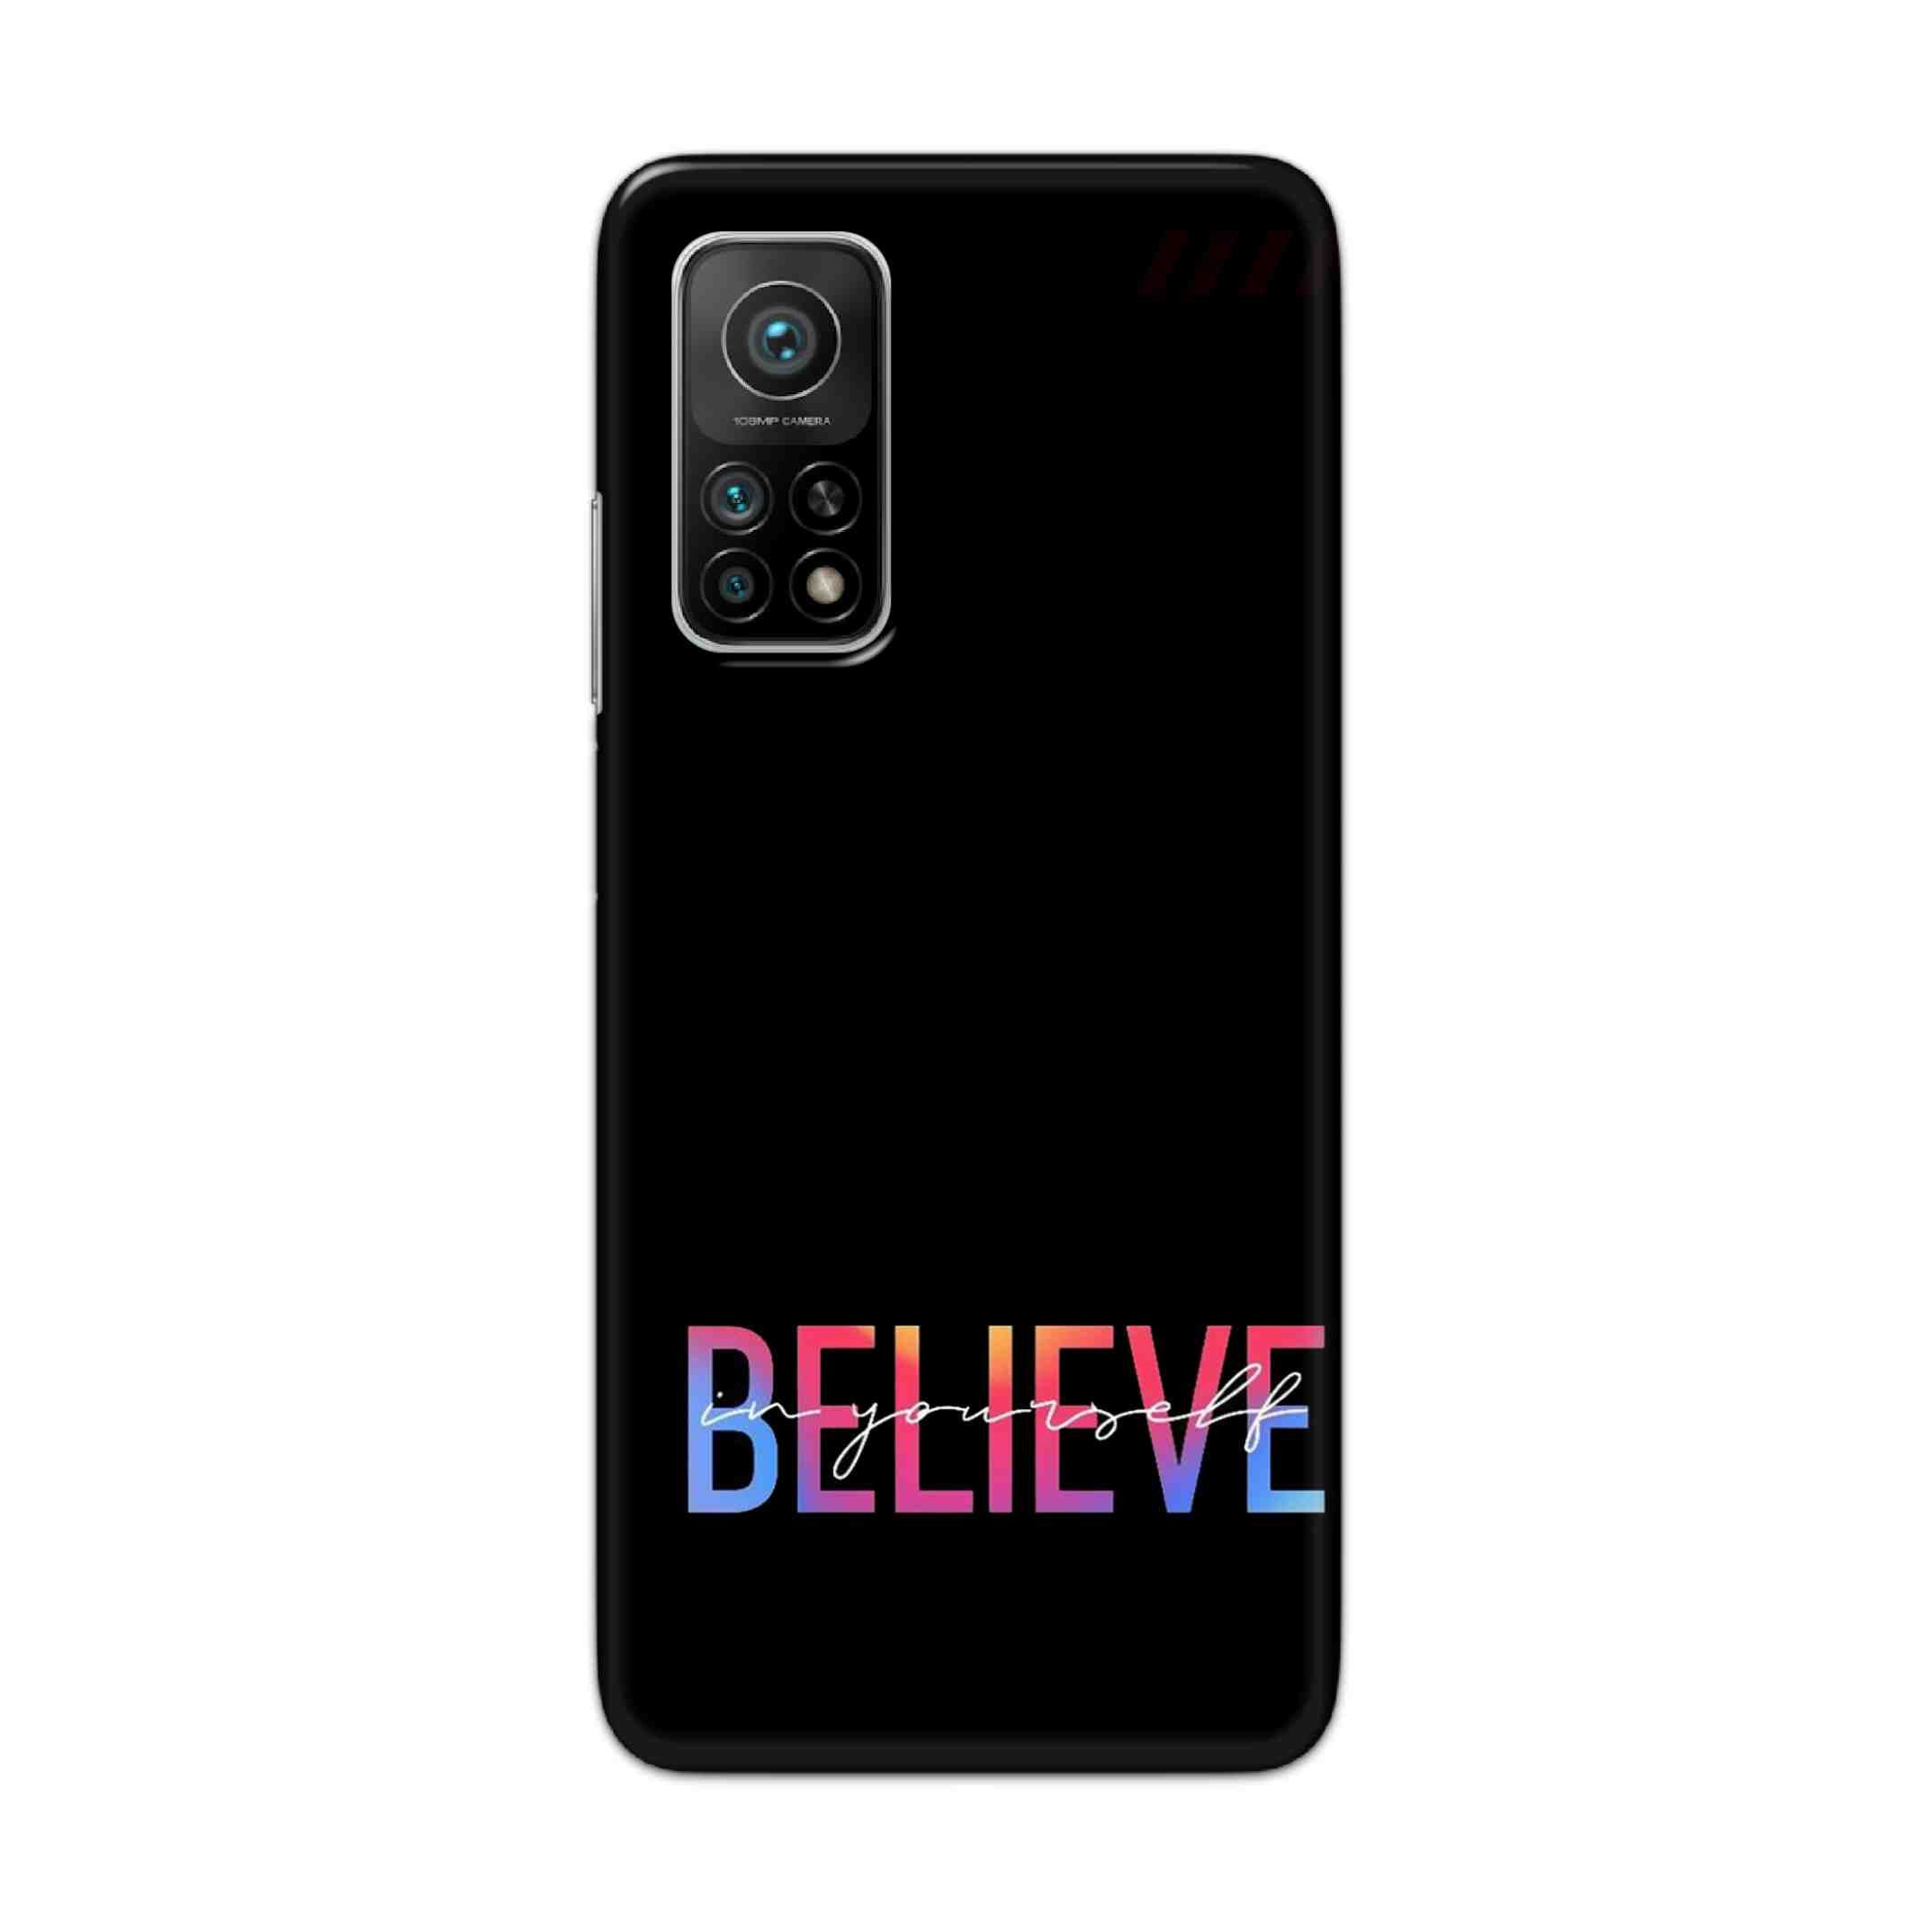 Buy Believe Hard Back Mobile Phone Case Cover For Xiaomi Mi 10T 5G Online